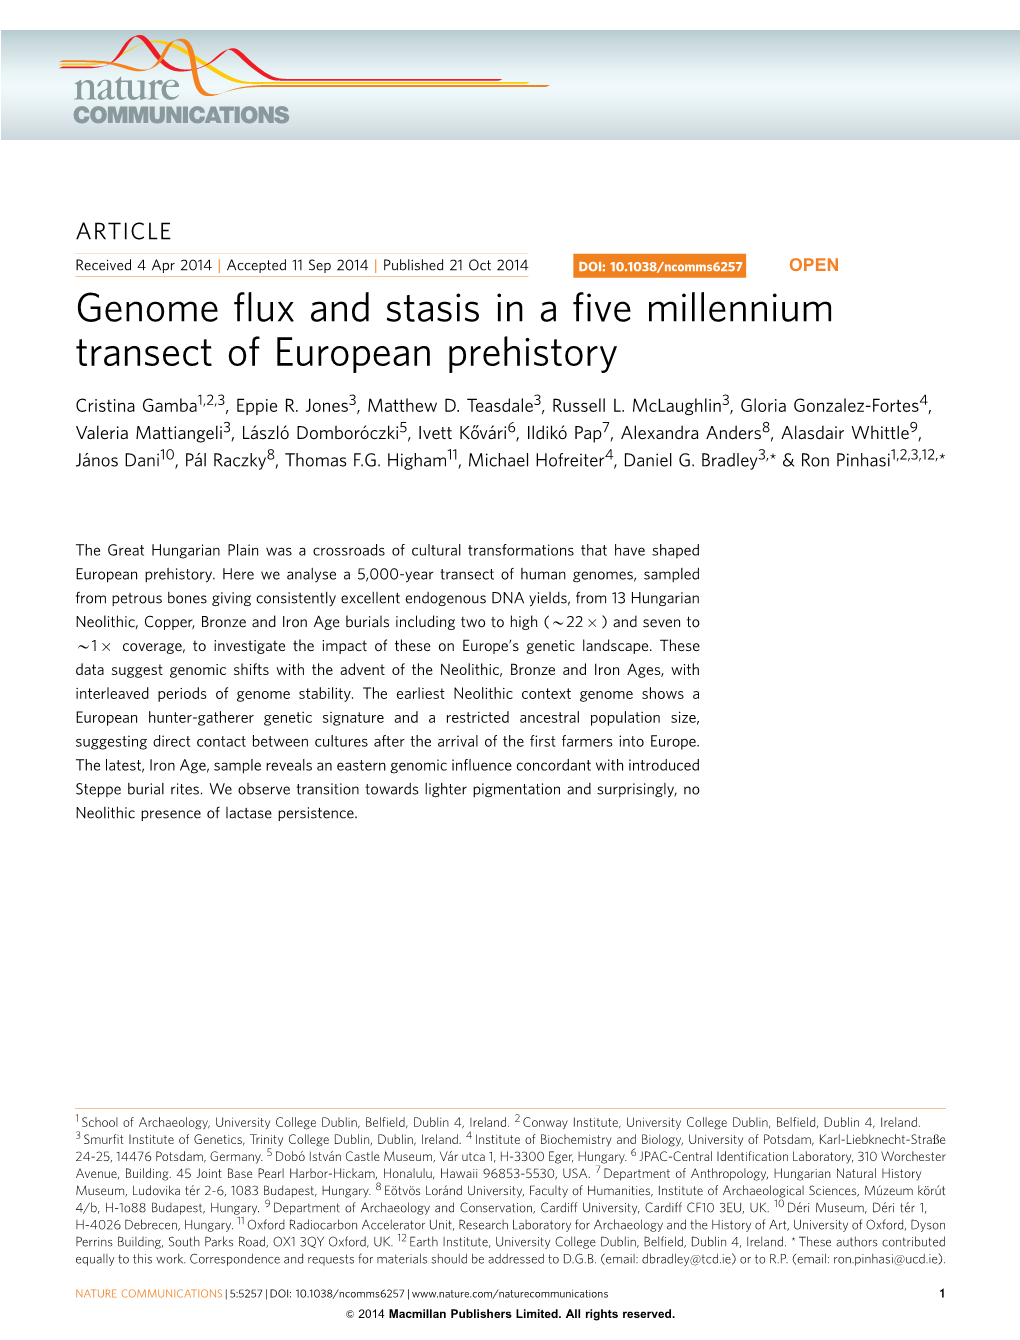 Genome Flux and Stasis in a Five Millennium Transect of European